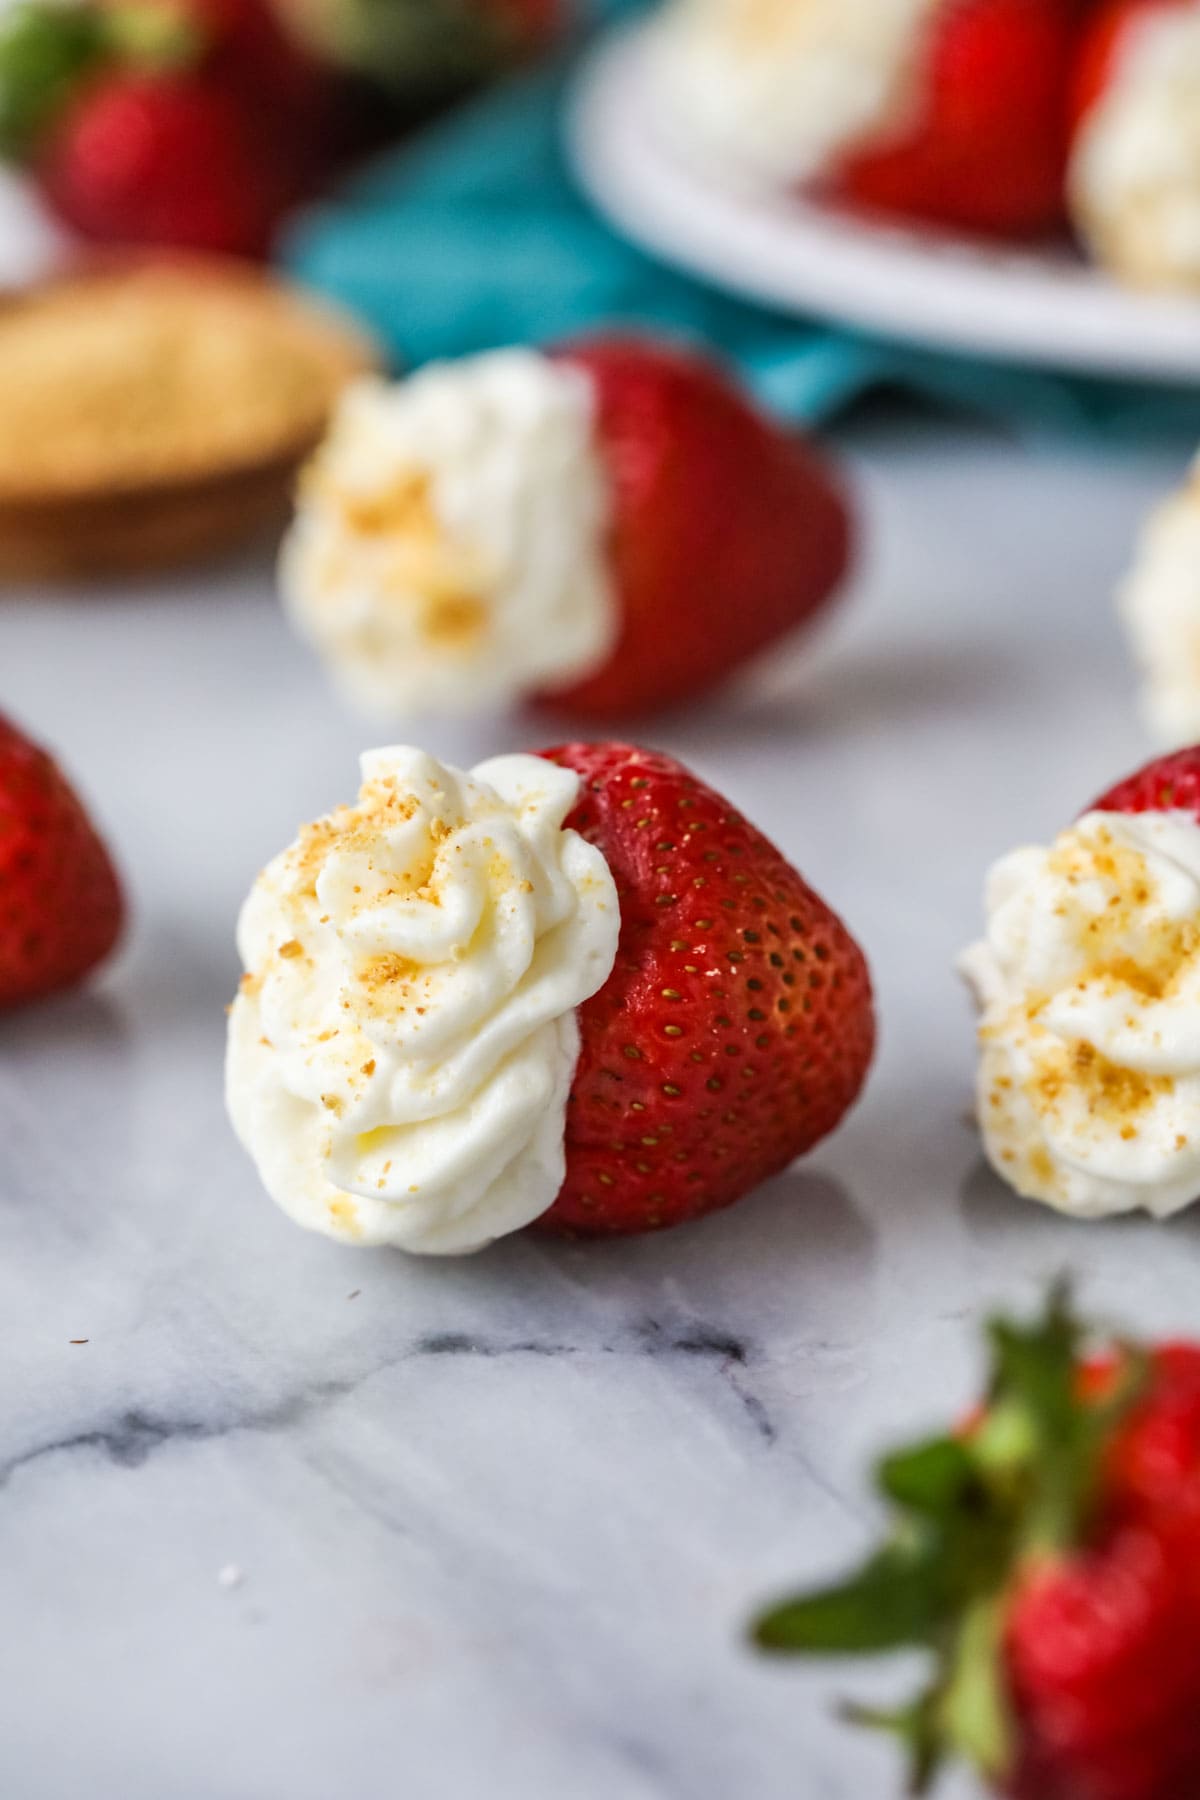 Strawberry that has been filled with a cheesecake mixture and topped with graham cracker crumbs.